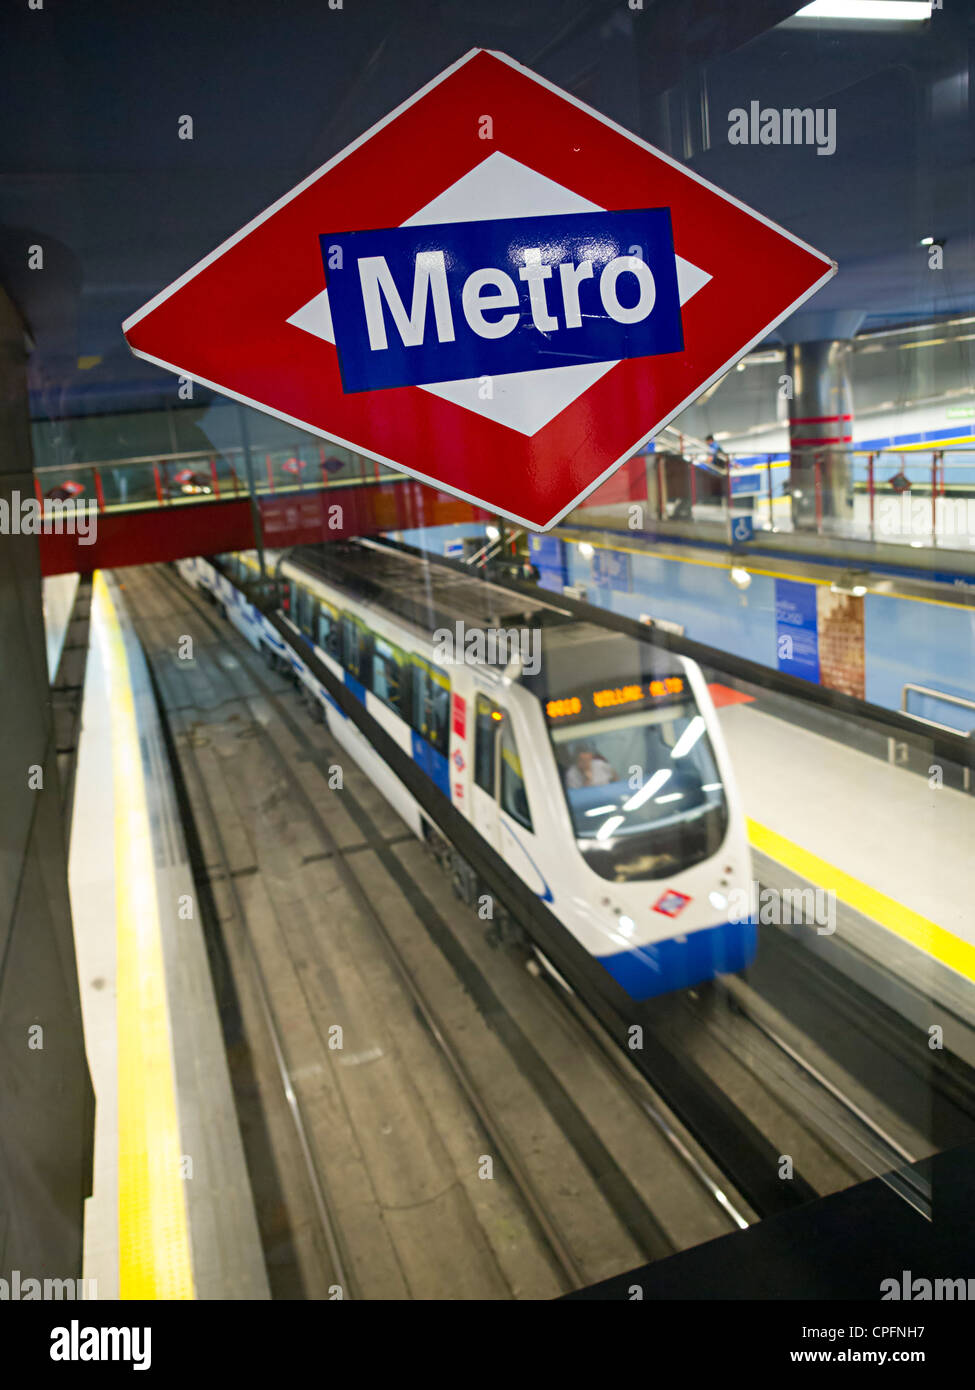 Motion blurred train at underground tube station platform in Madrid, Spain - shallow depth of field with focus on Metro logo Stock Photo